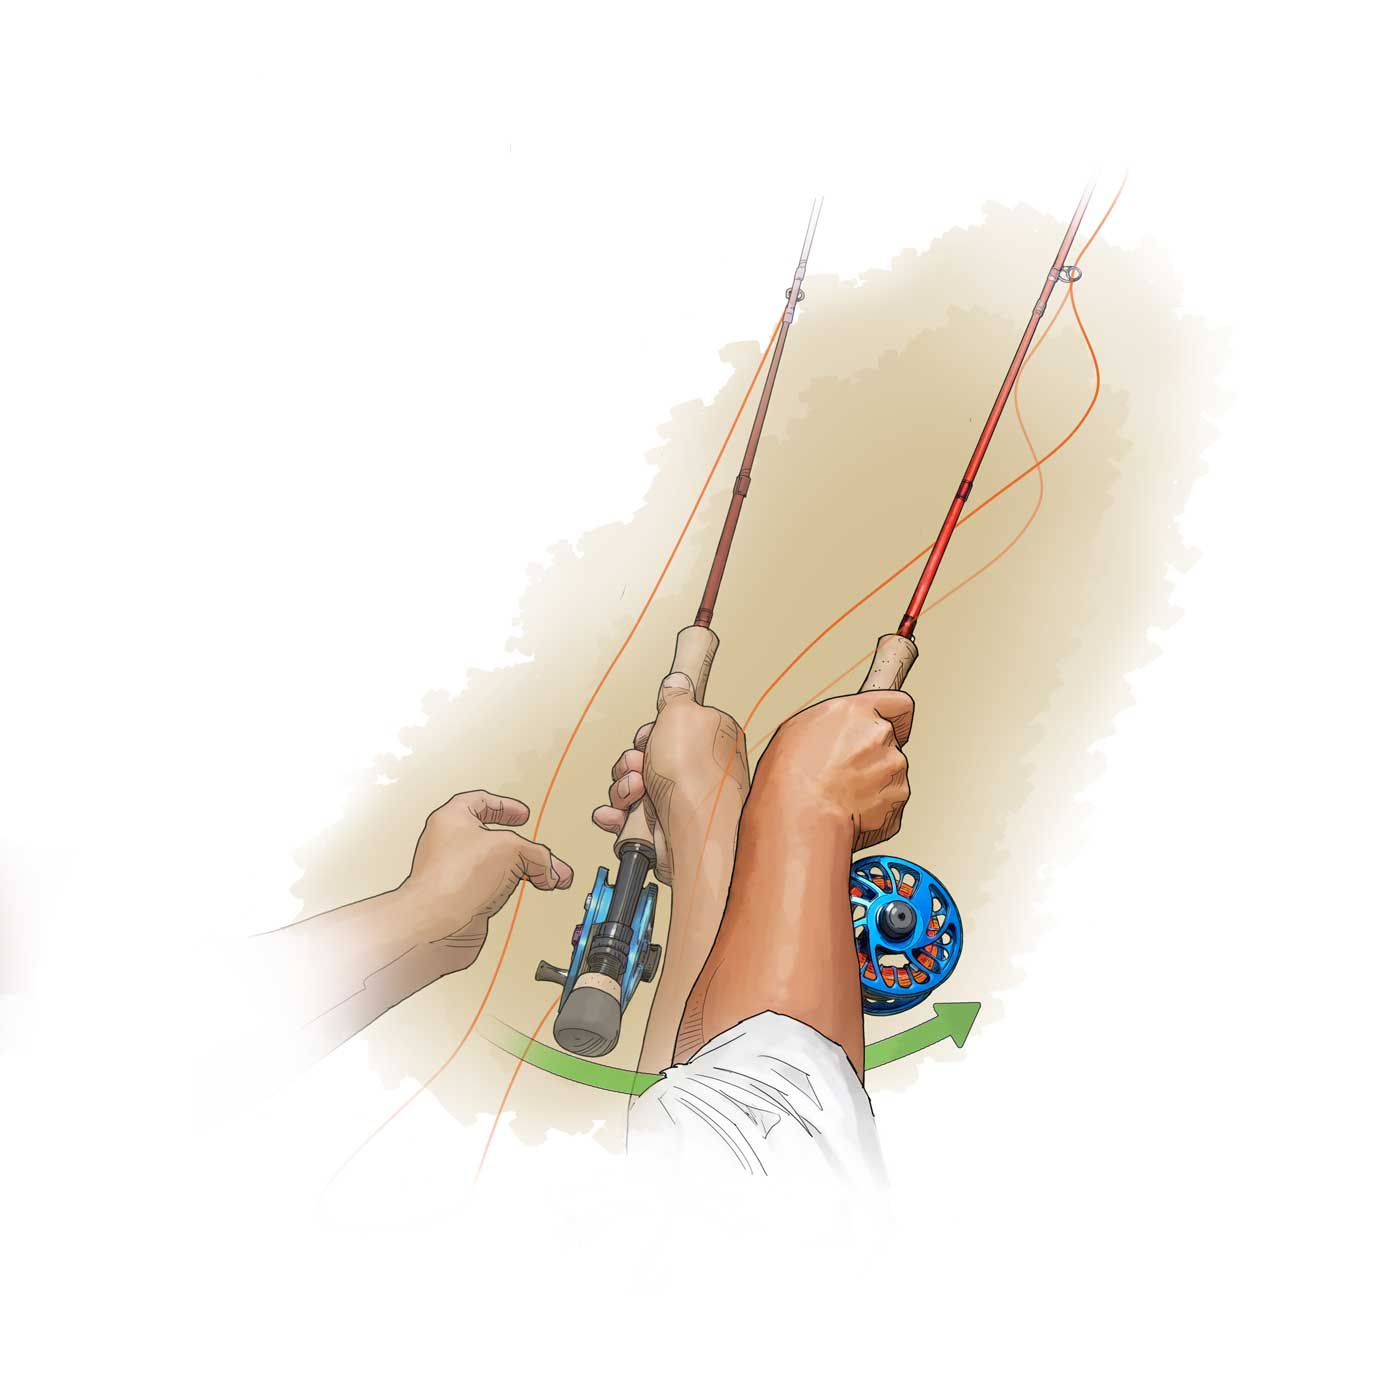 Fly casting tips for fly fishing with a fly rod. distance casting